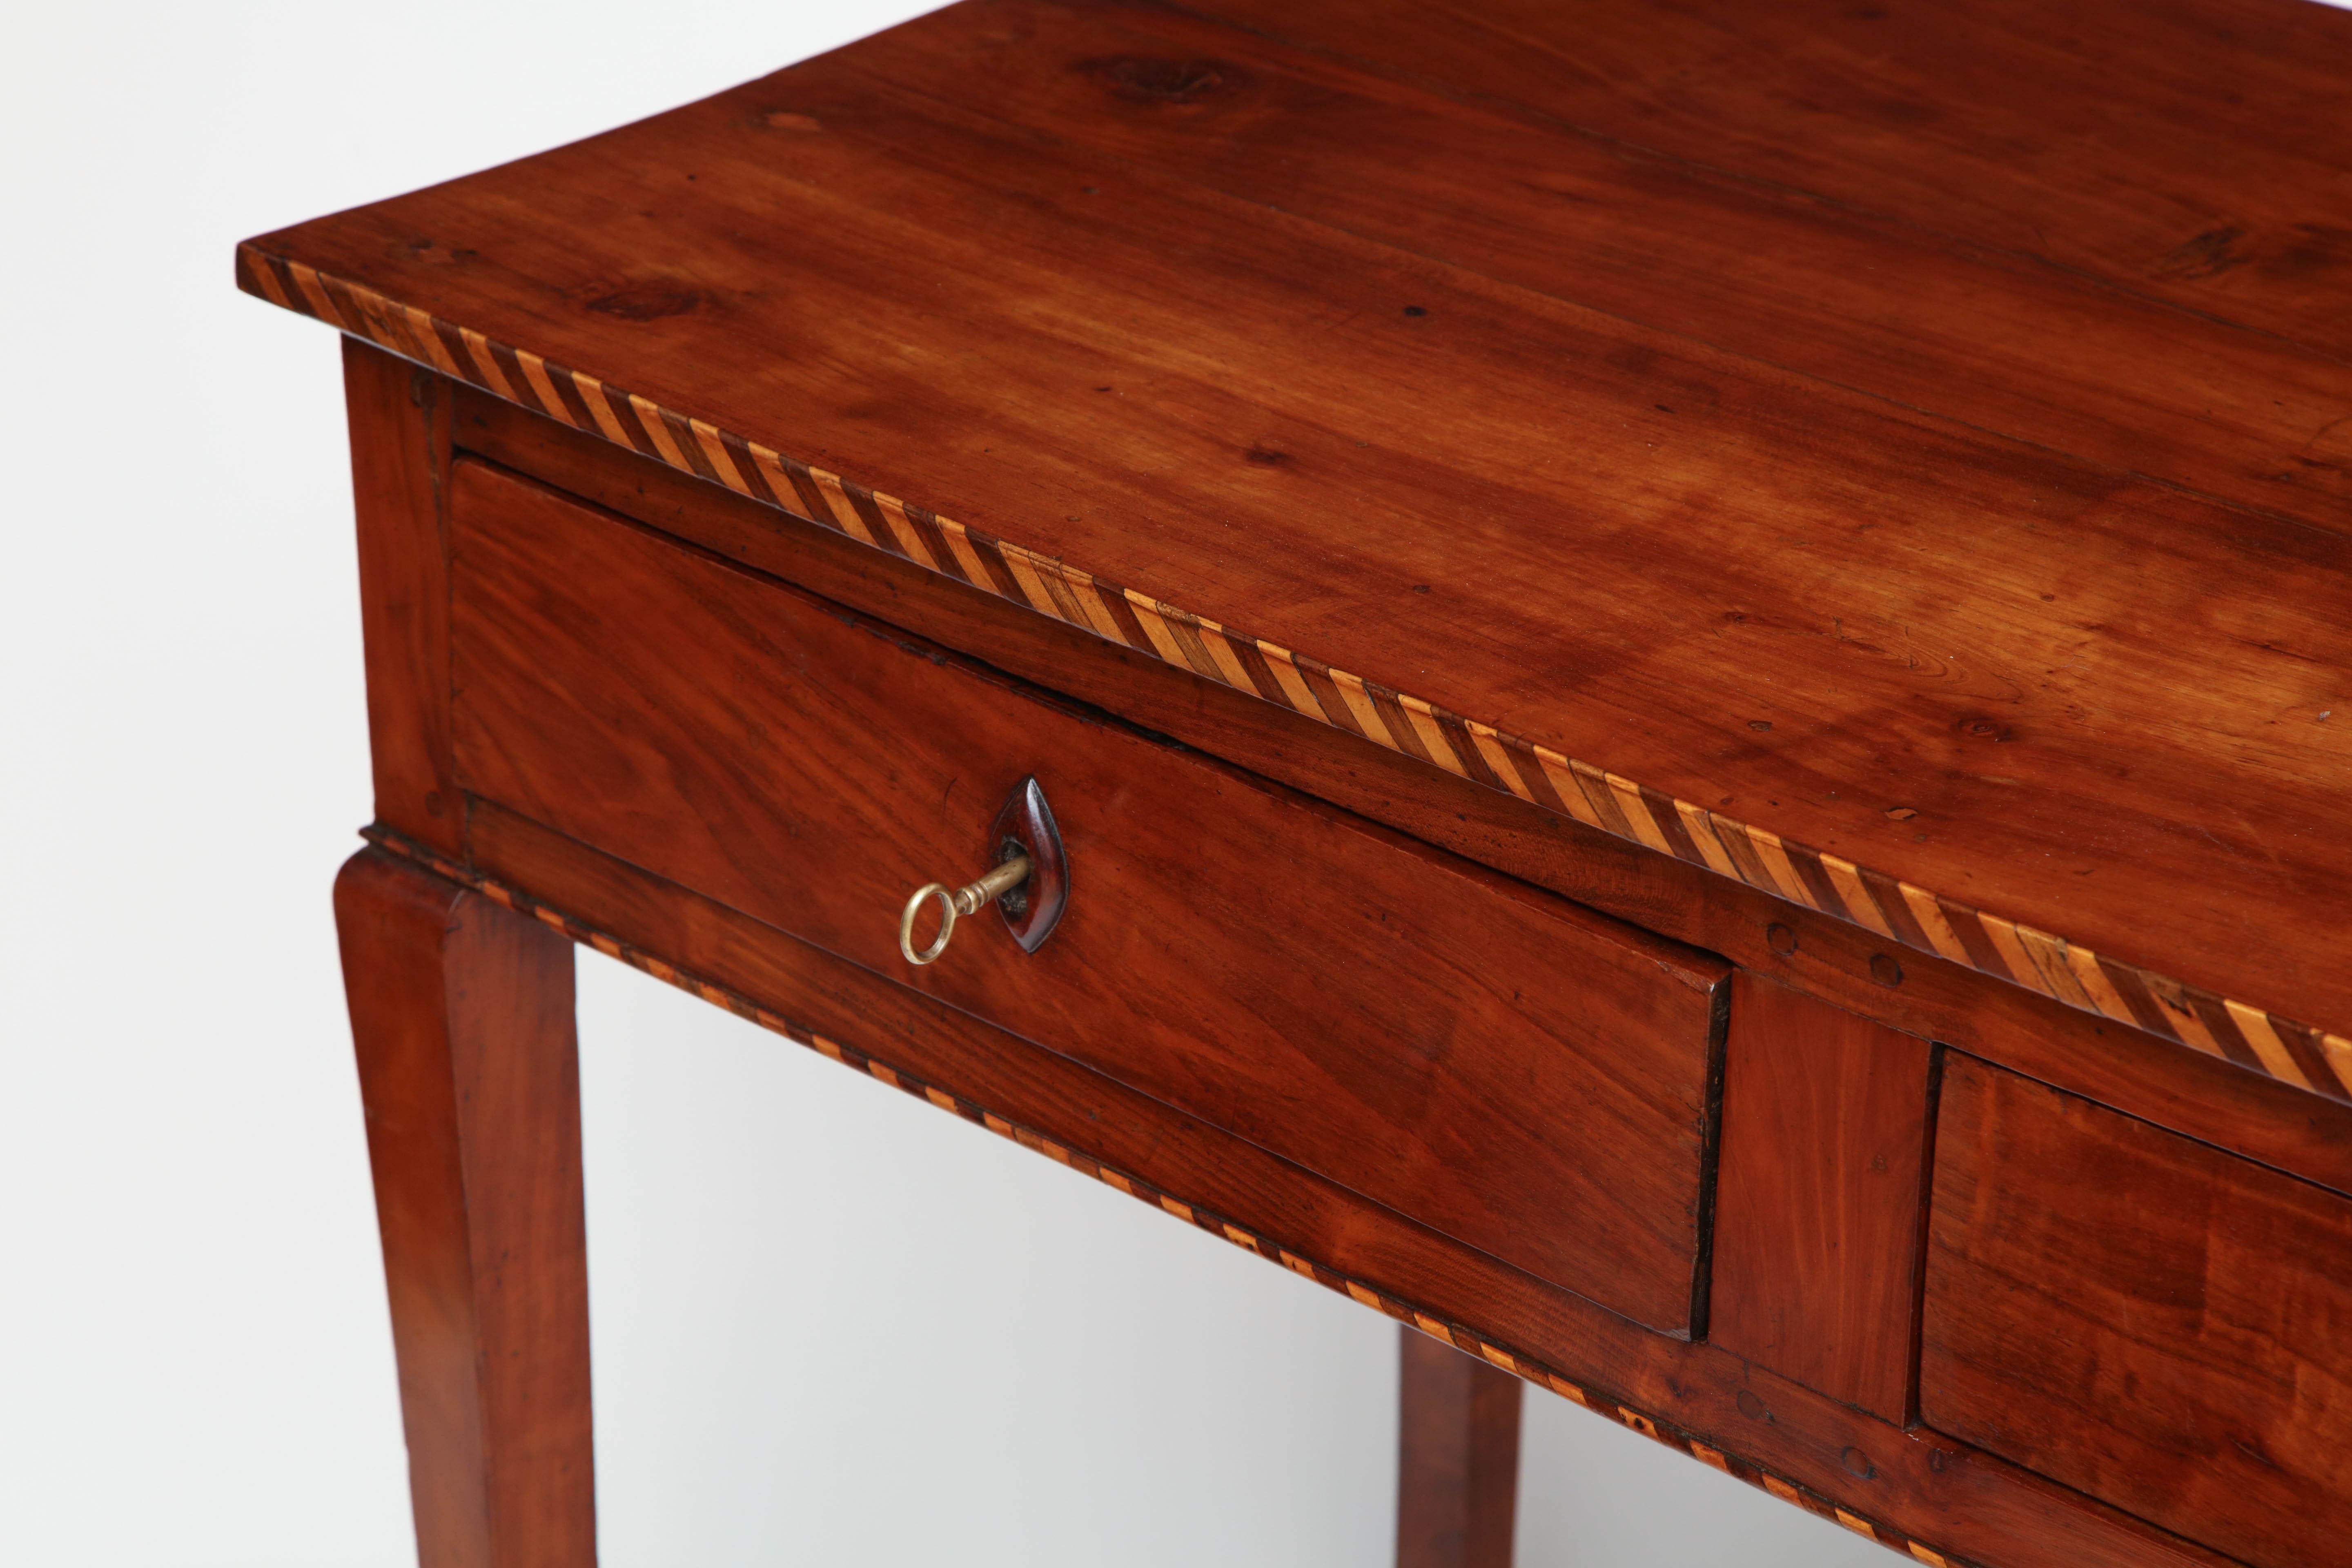 18th Century Italian Cherry Table with Parquetry Border and Two Drawers 5